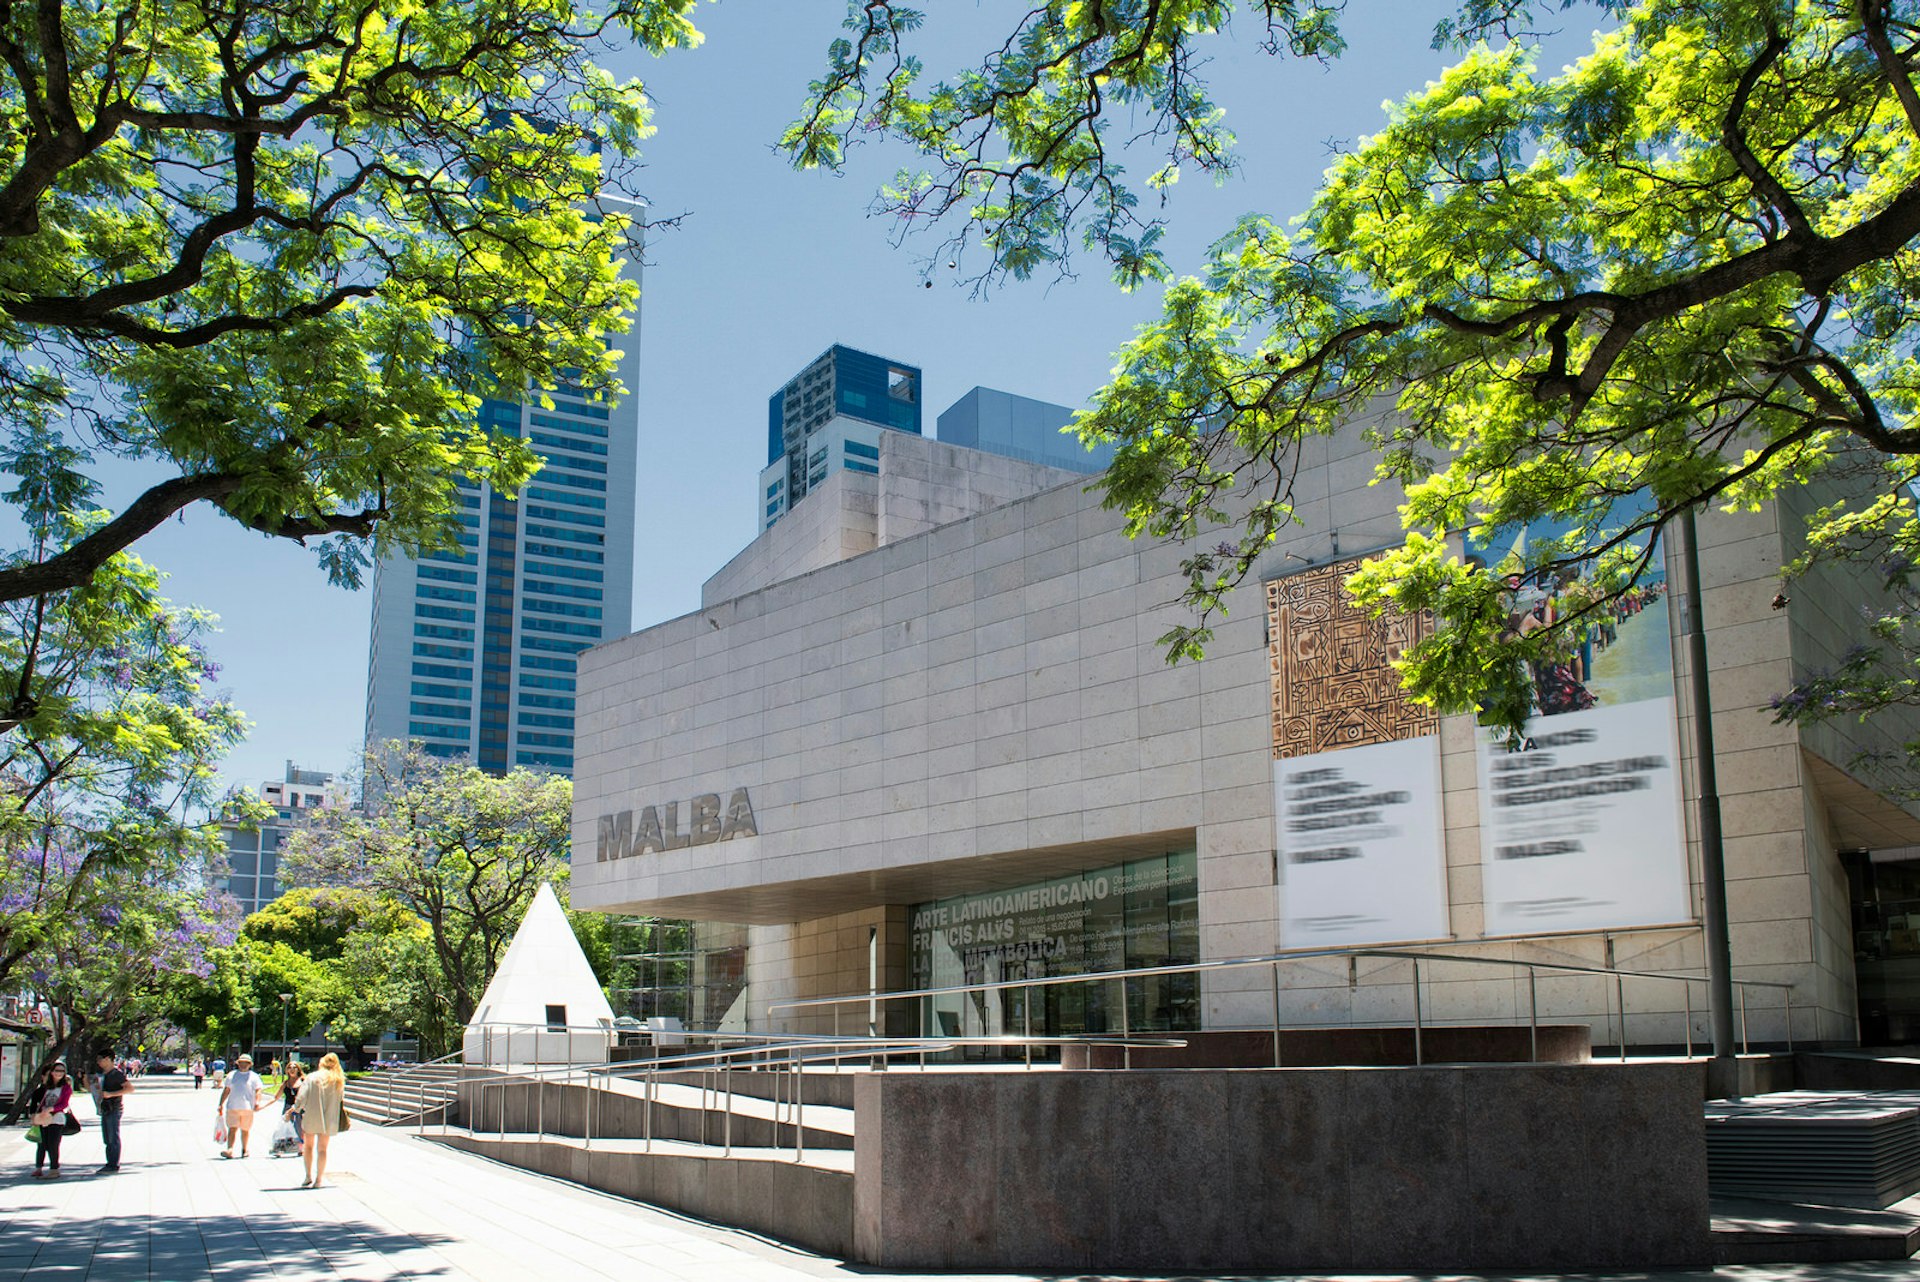 Buenos Aires' MALBA contains classic works by Frida Kahlo and Diego Rivera © Fandrade / Getty Images